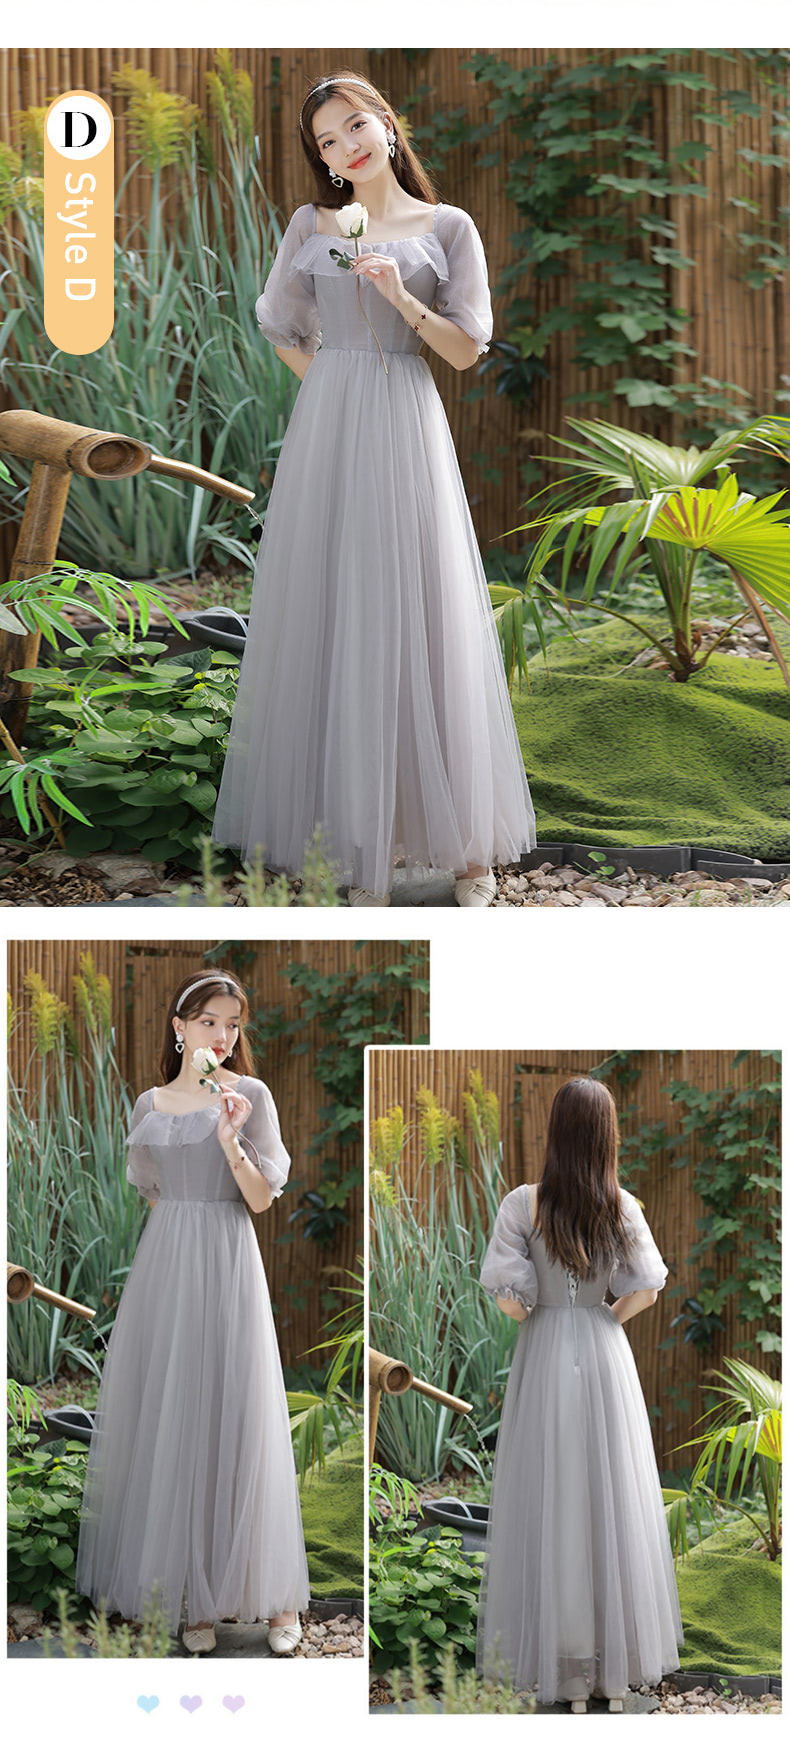 Womens-Casual-Party-Wedding-Guest-Bridesmaid-Maxi-Dress-Gown21.jpg